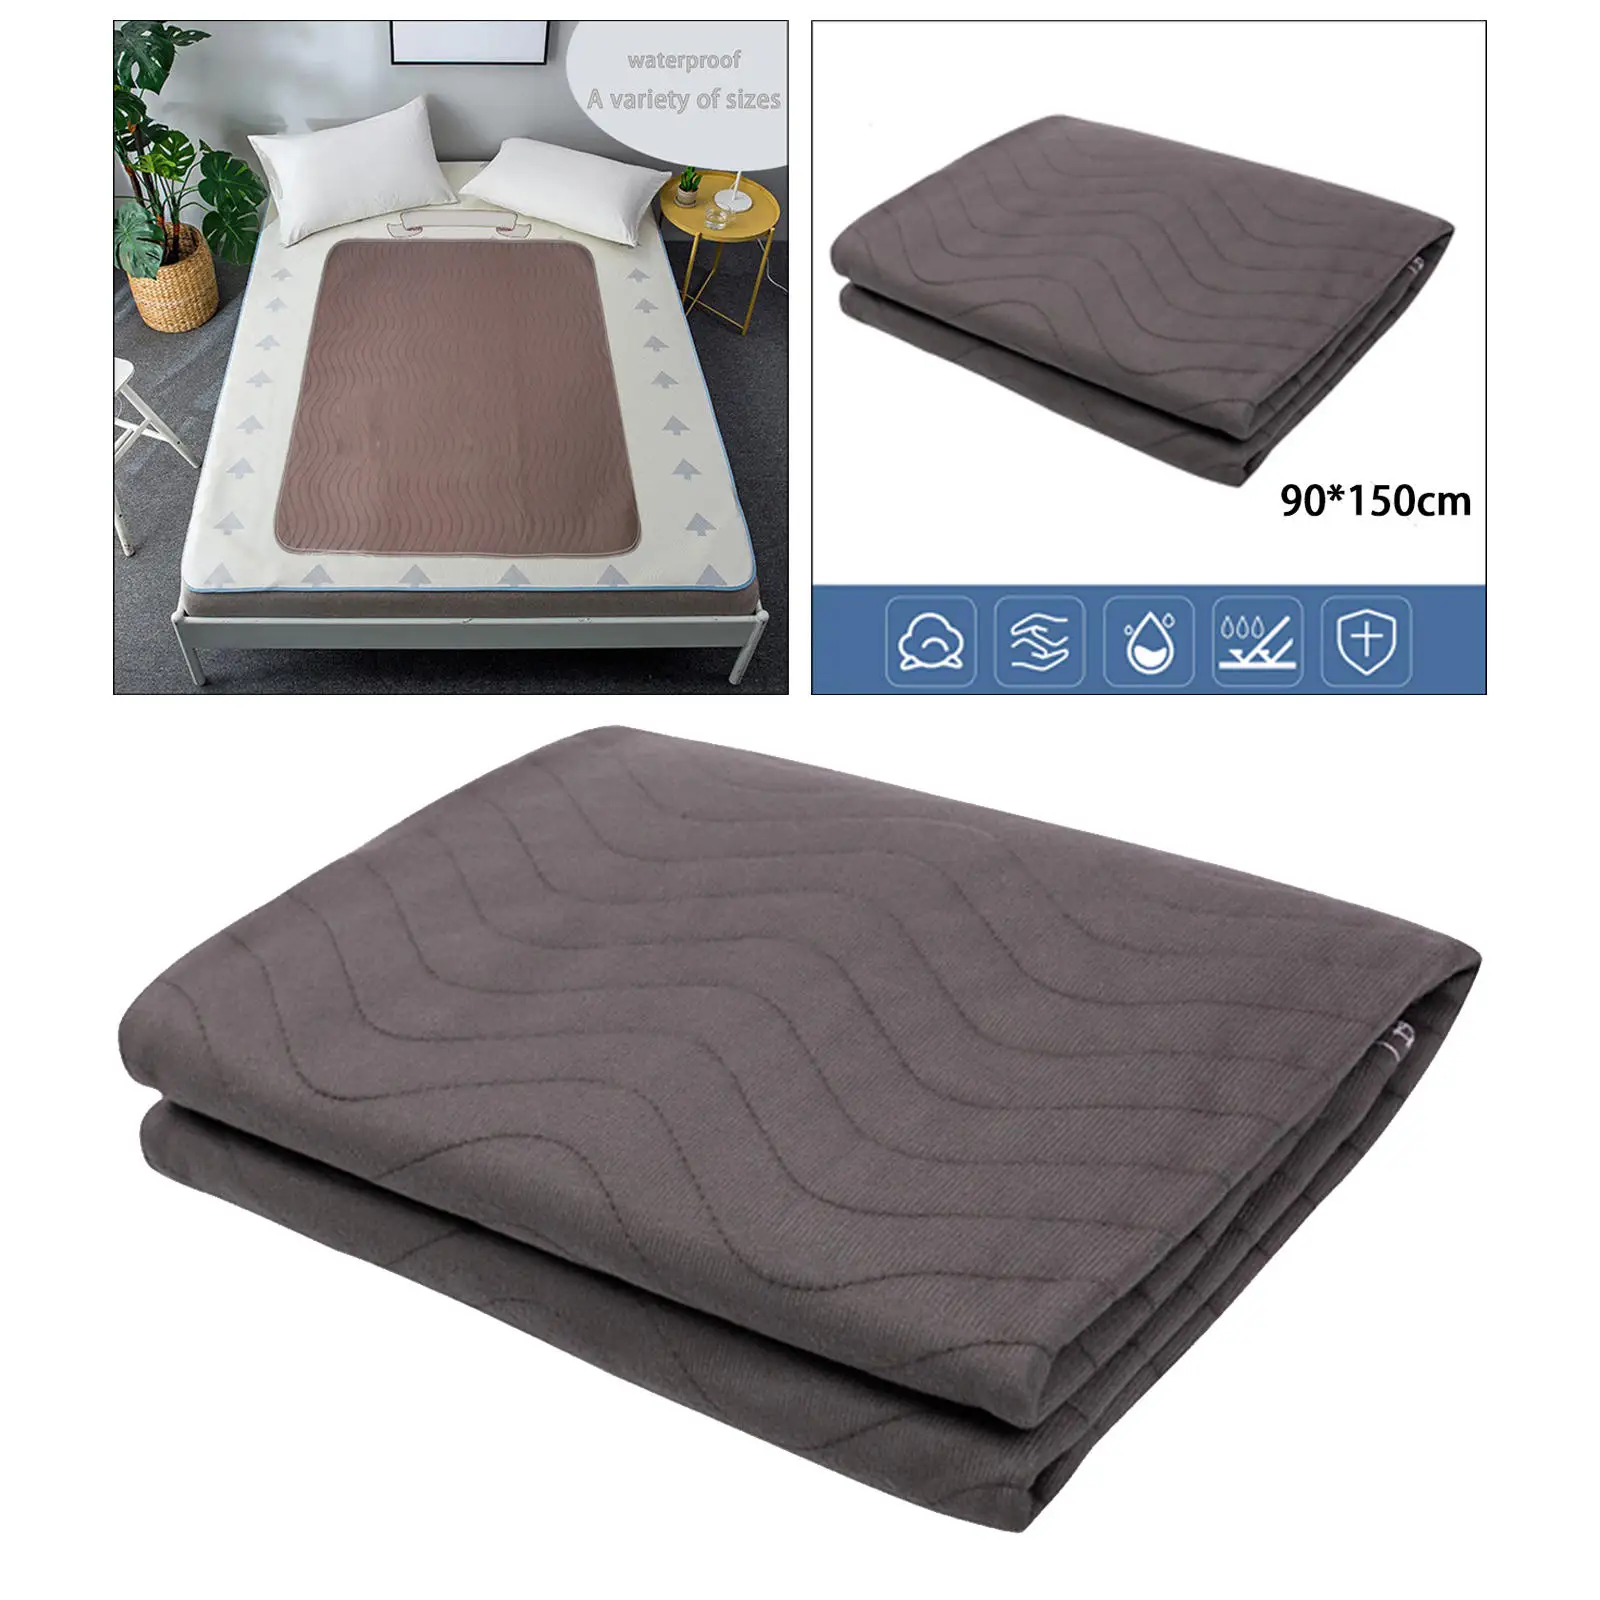 Incontinence  Bed Pad Chair Pad Washable Waterproof Protector for Spills Urine Fluids Adults Rubber Underwear Changing Pee